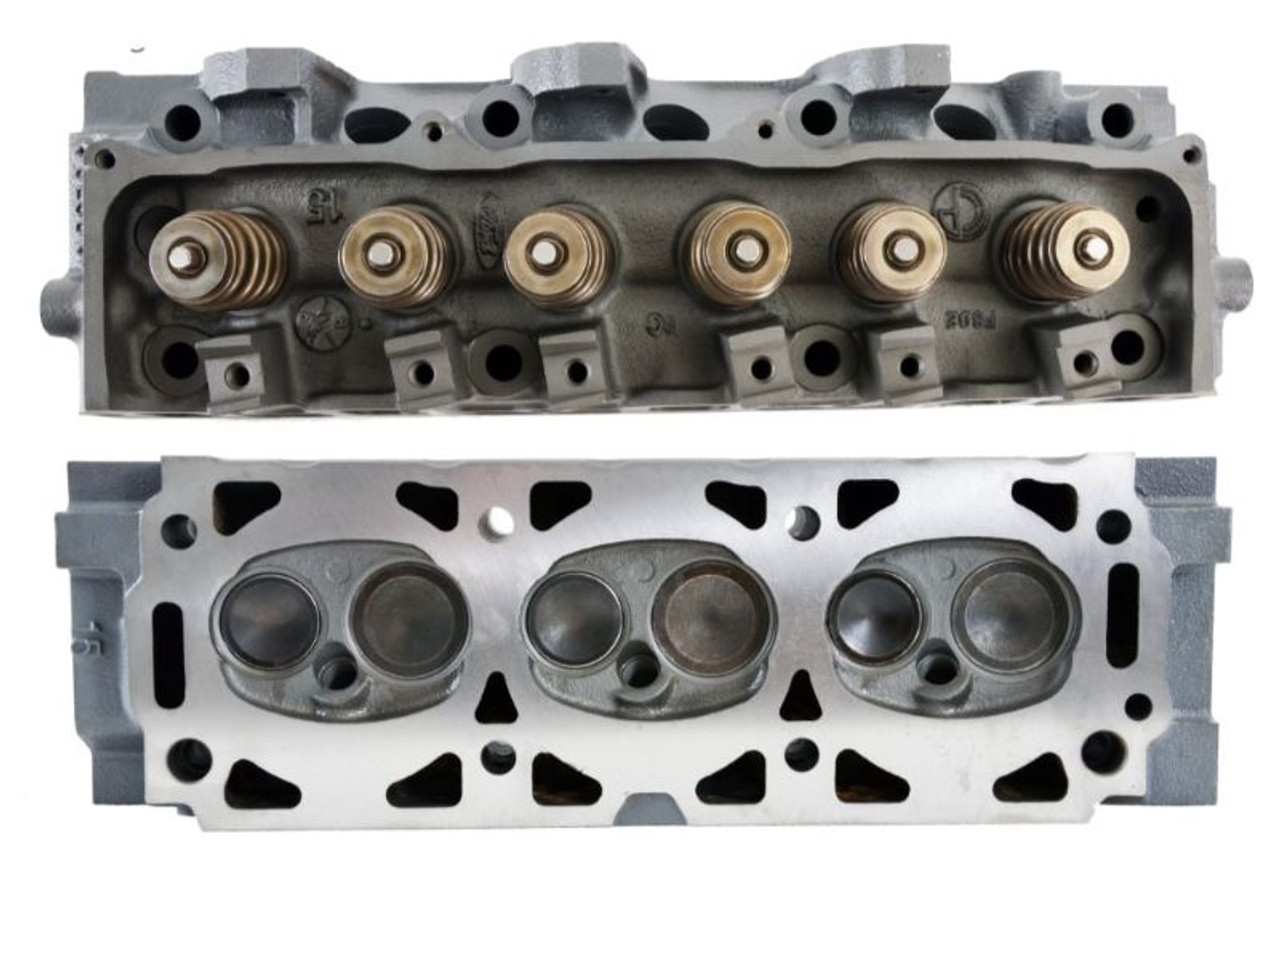 Cylinder Head Assembly - 2008 Ford Ranger 3.0L (CH1027R.E46)